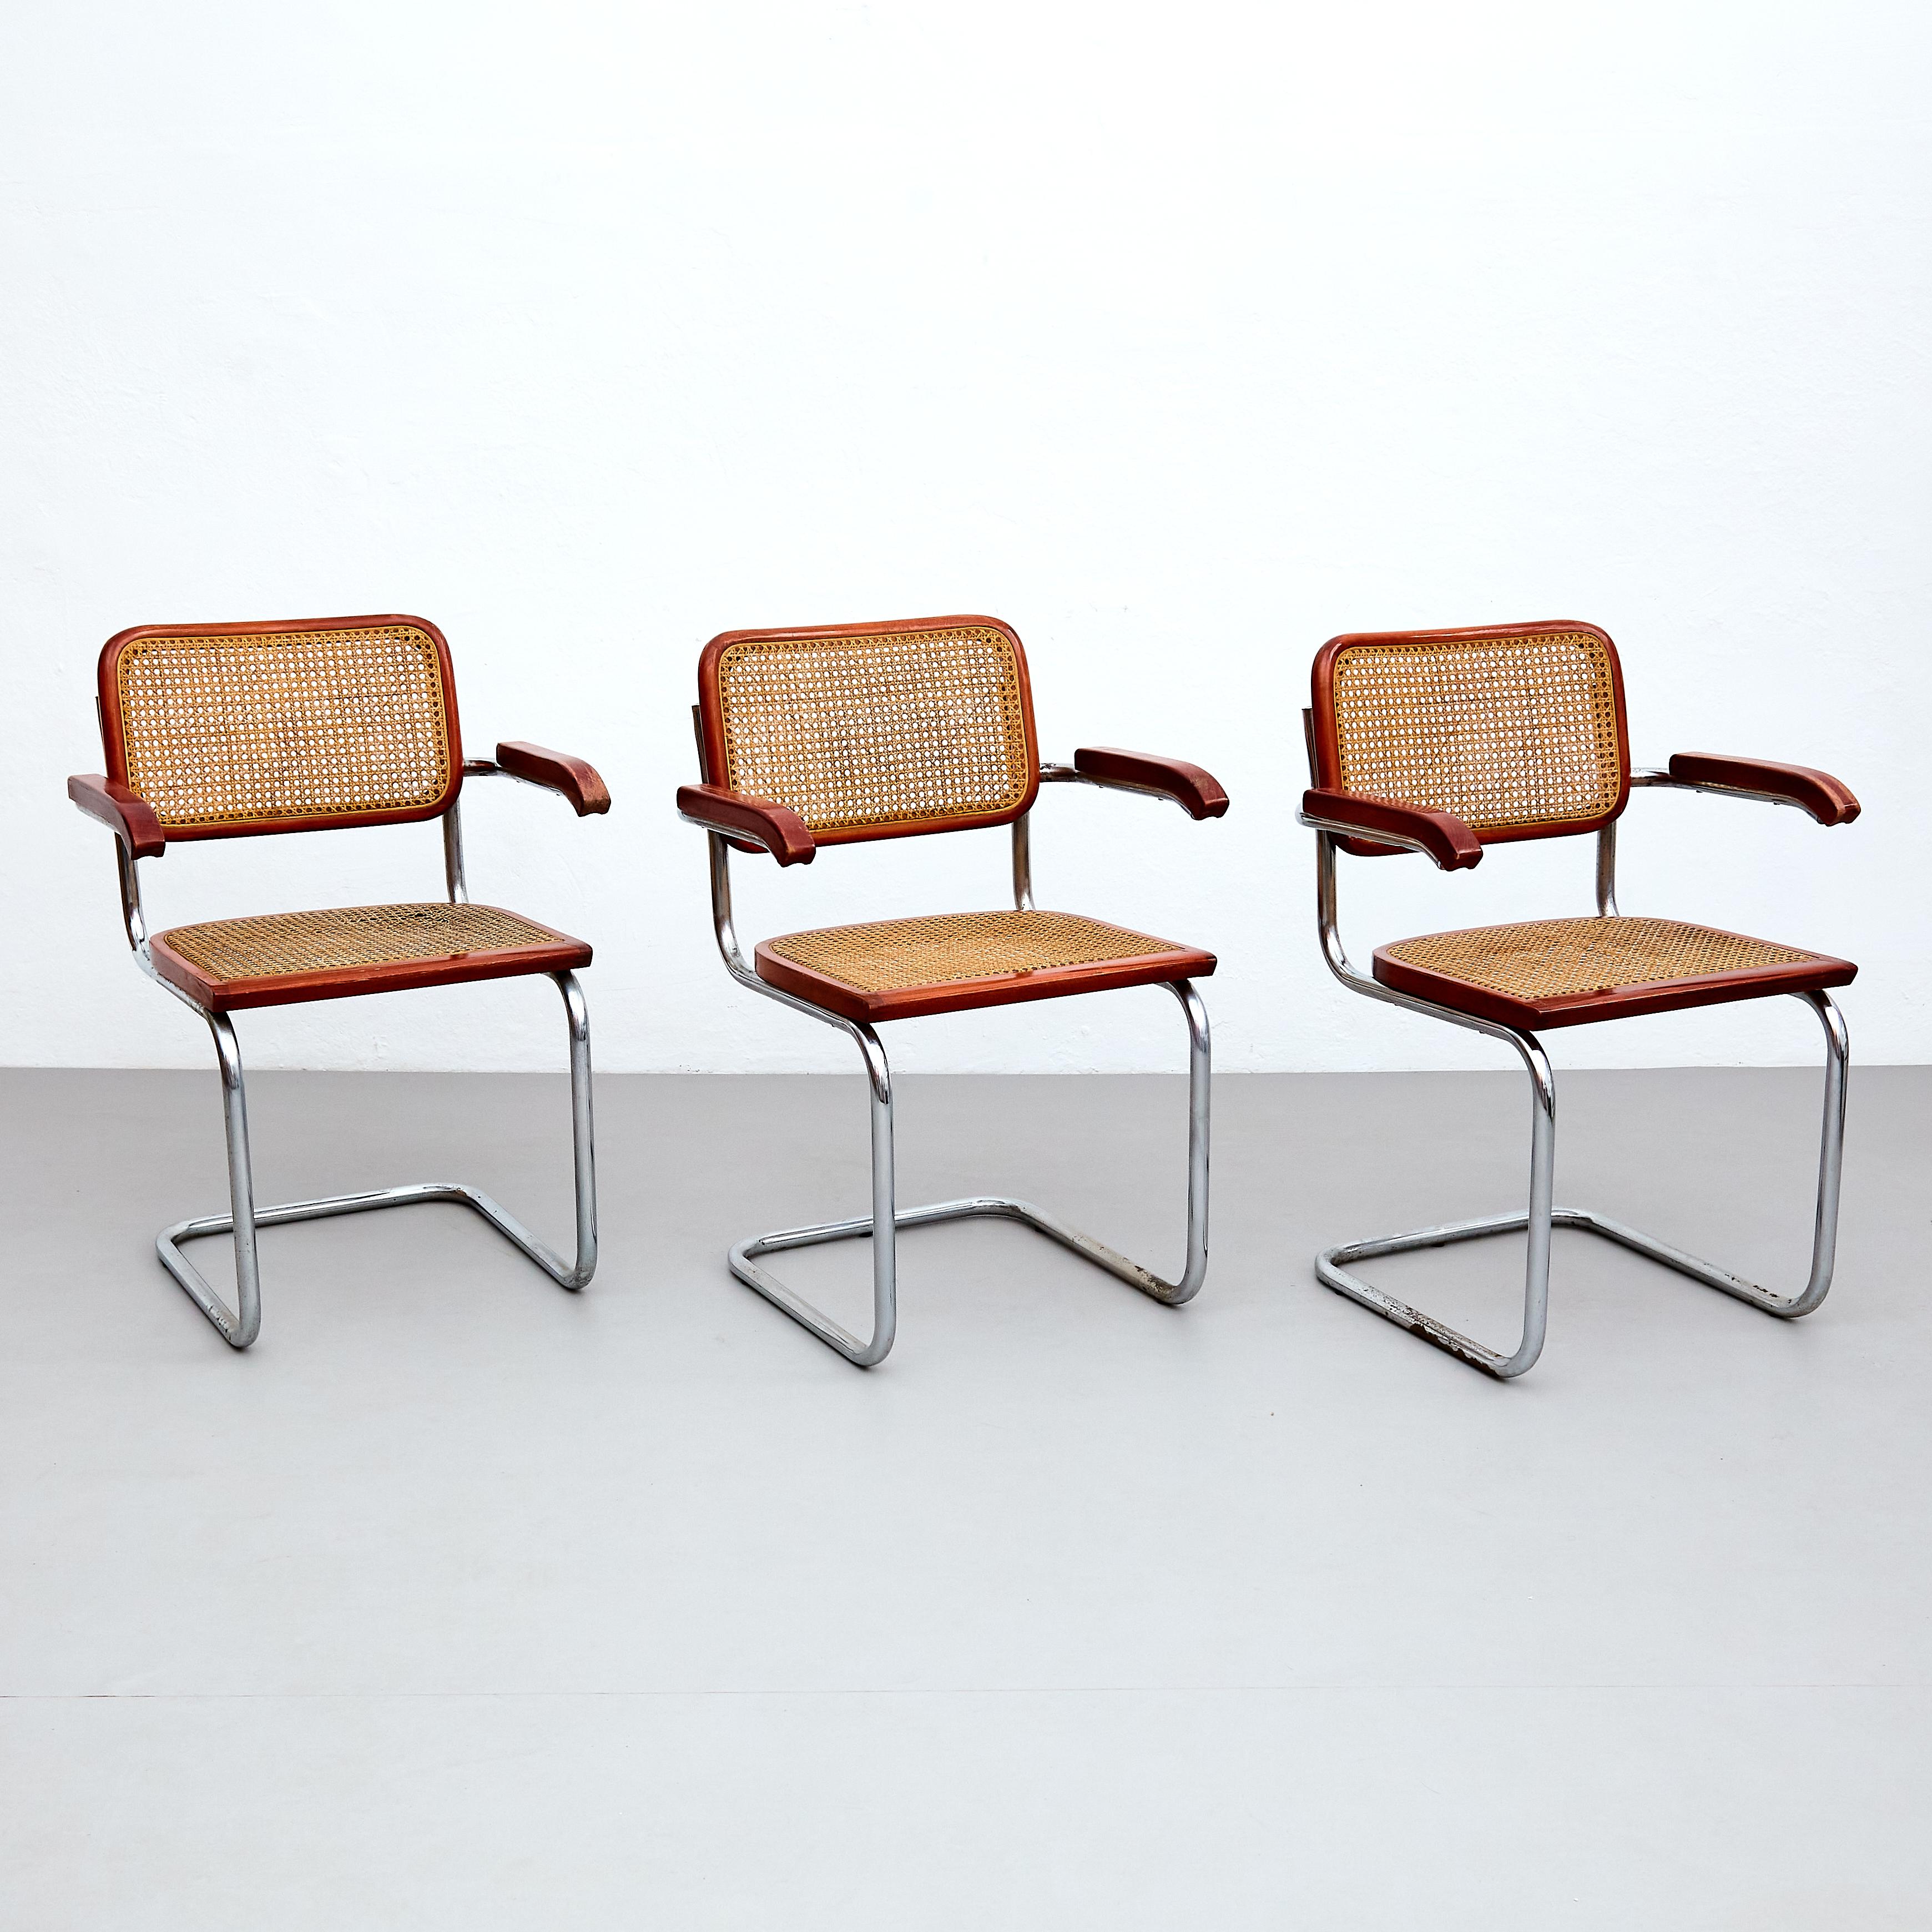 Introducing this exceptional set of 6 Cesca chairs, designed by the renowned Marcel Breuer and manufactured in Italy, circa 1960. These iconic Mid-Century Modern chairs showcase a perfect harmony of materials, featuring metal pipe frames, wood seat